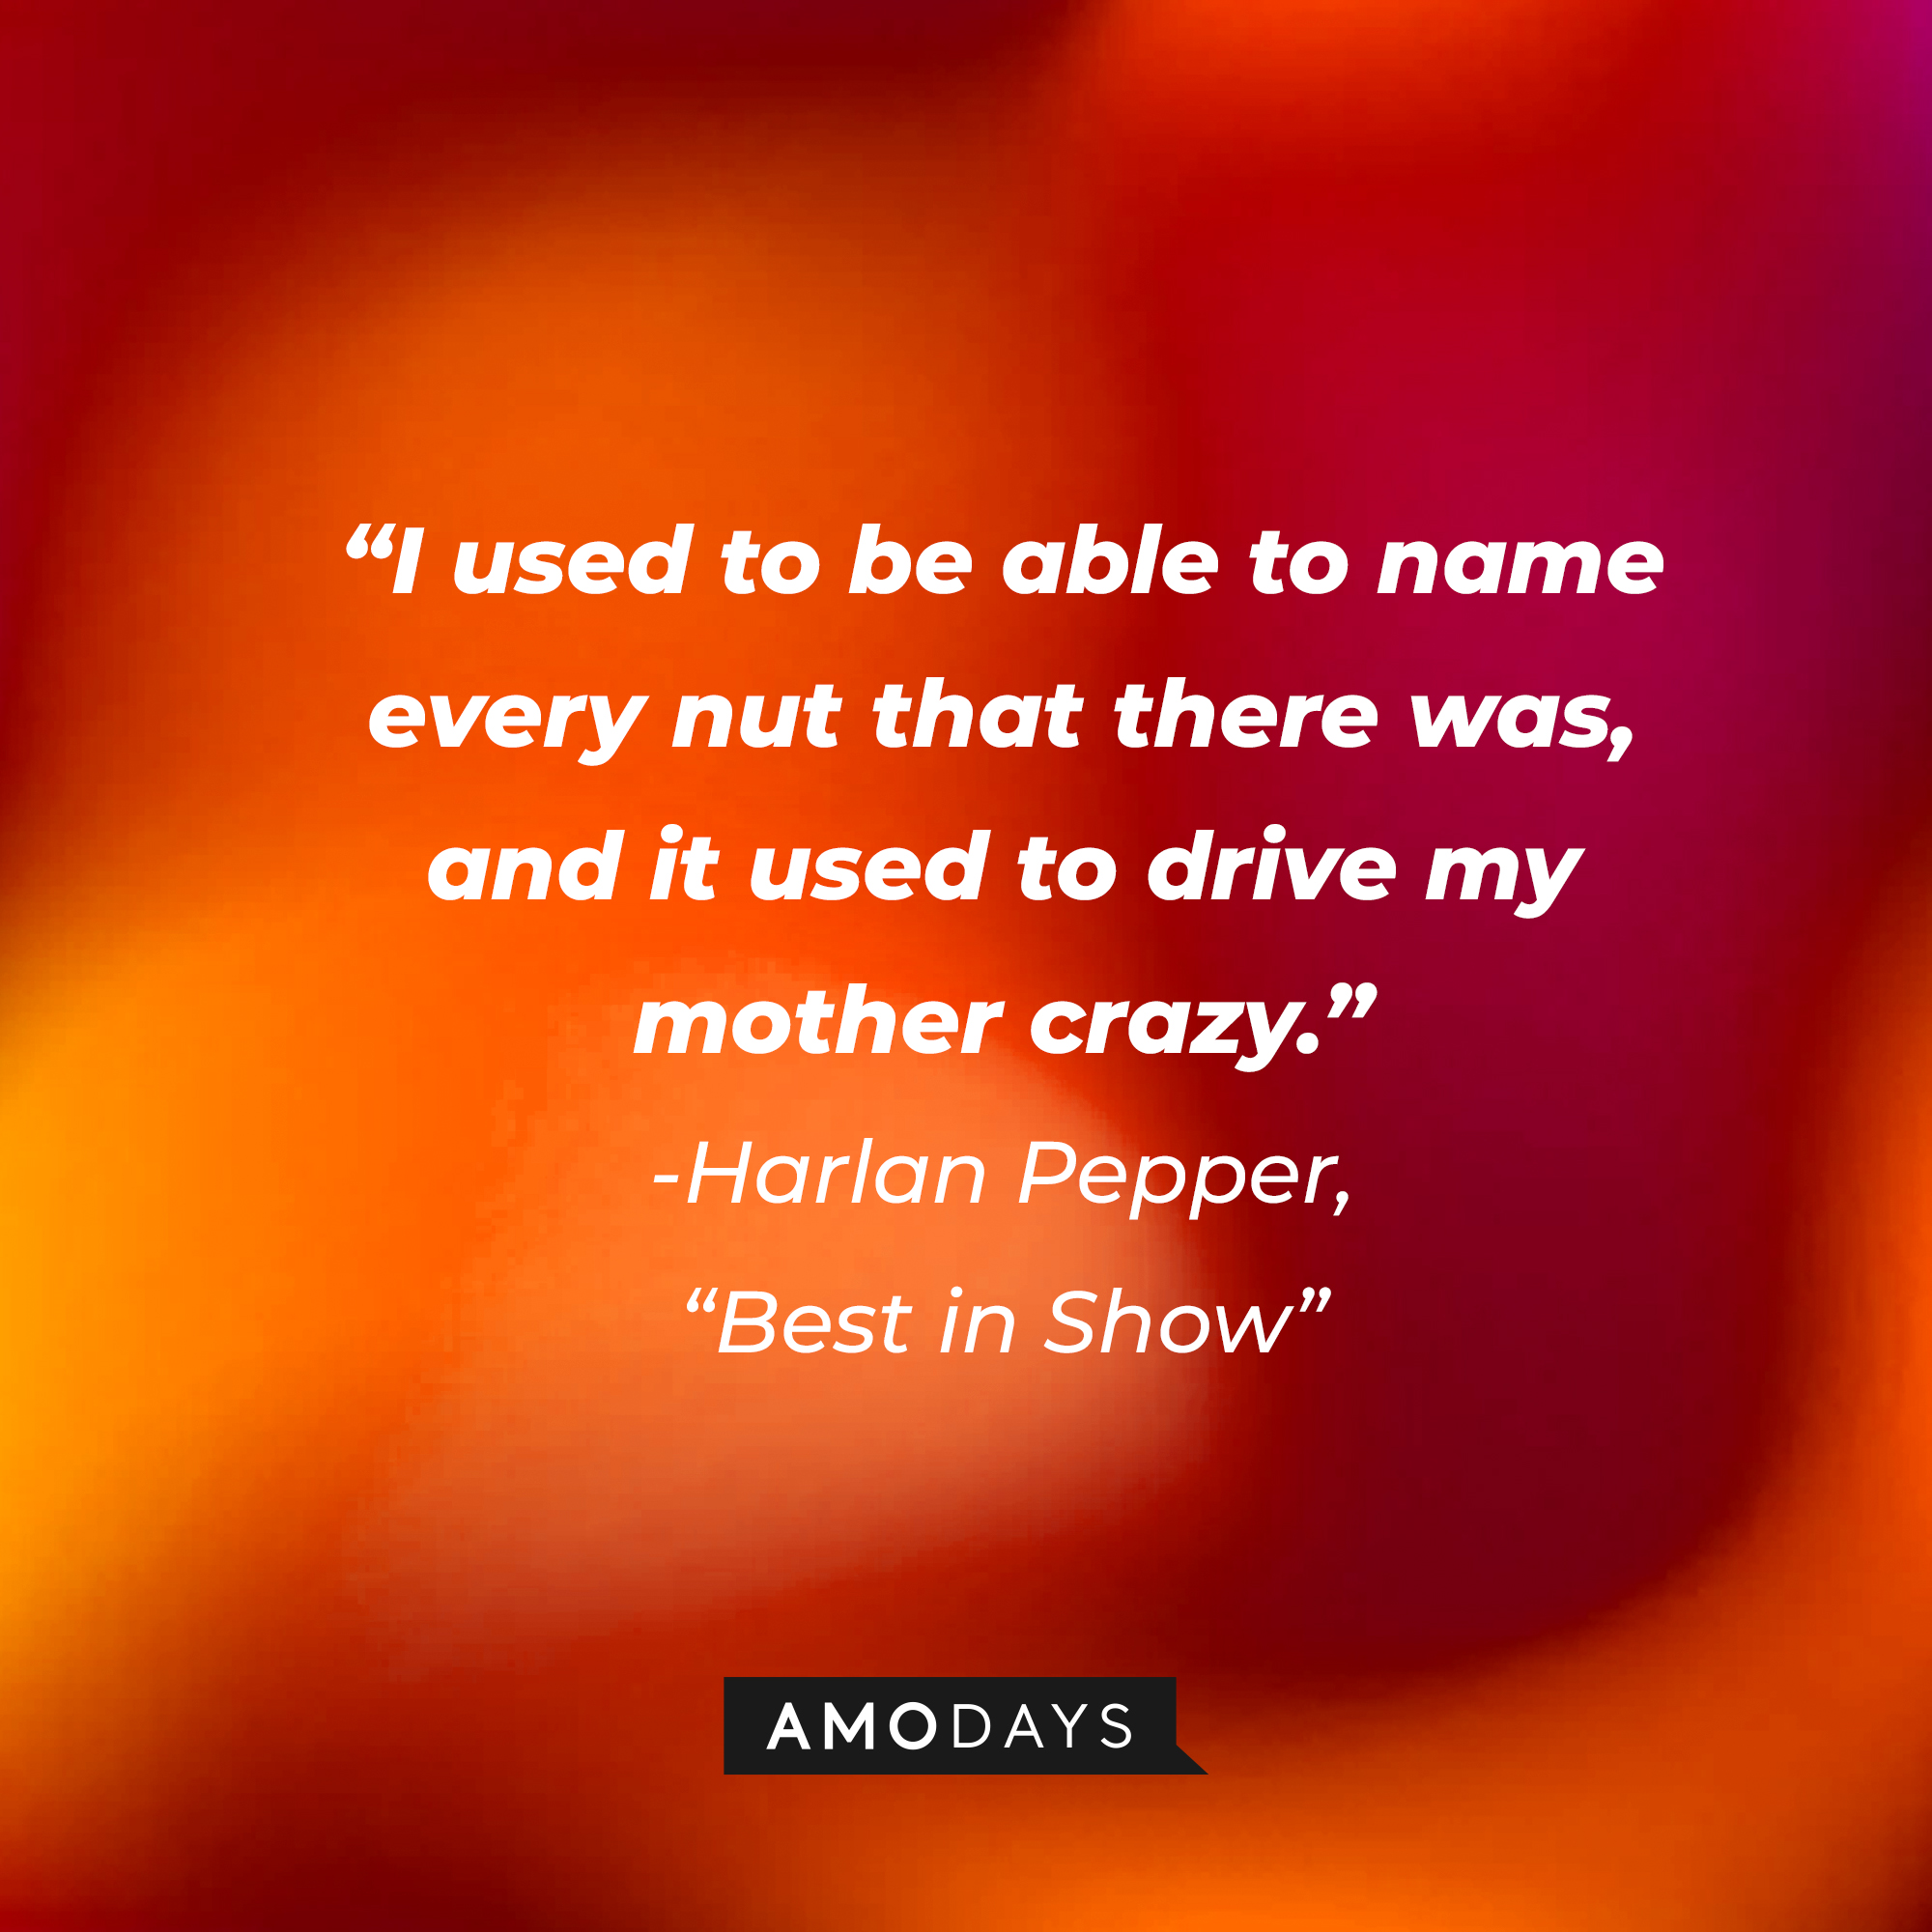 Harlan Pepper's quote in "Best in Show:" ”I used to be able to name every nut that there was, and it used to drive my mother crazy.” | Source: AmoDays